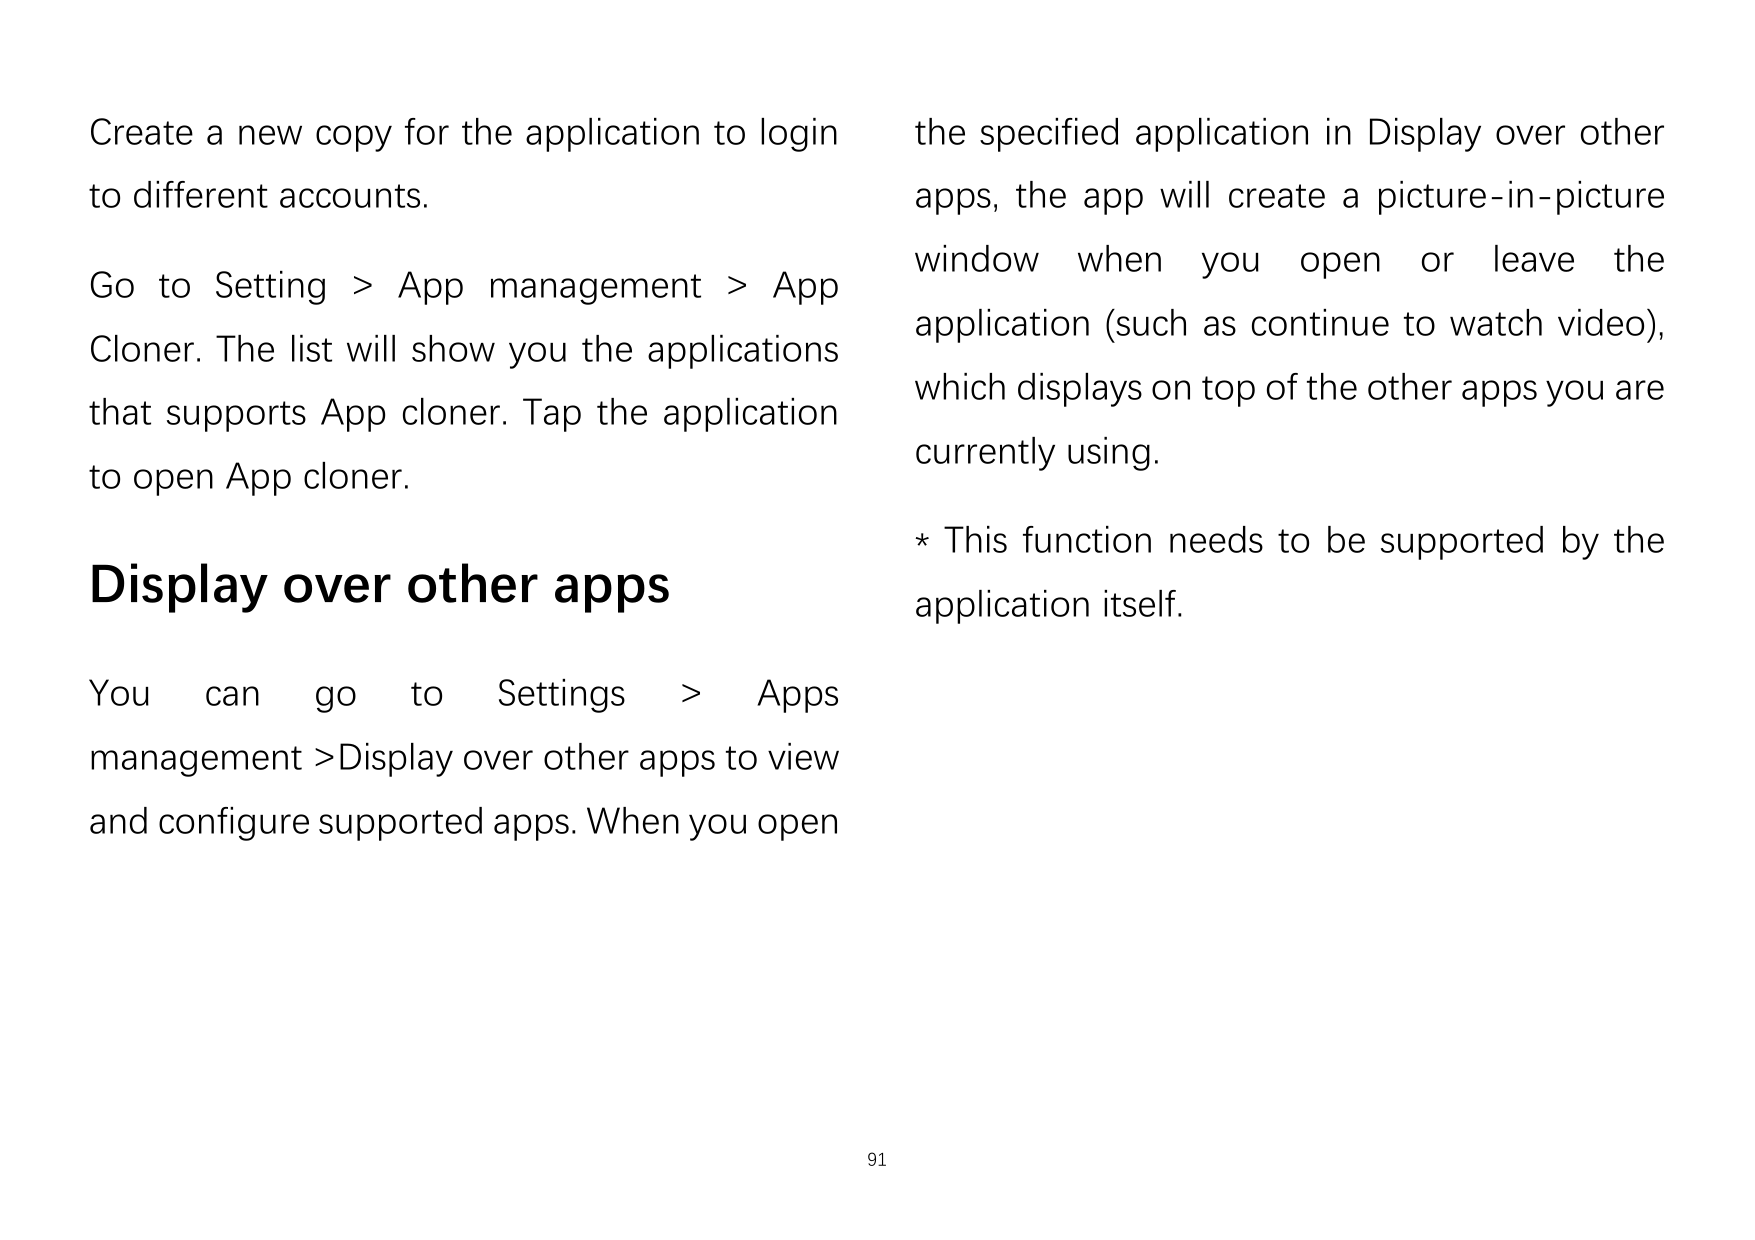 Create a new copy for the application to loginthe specified application in Display over otherto different accounts.apps, the app